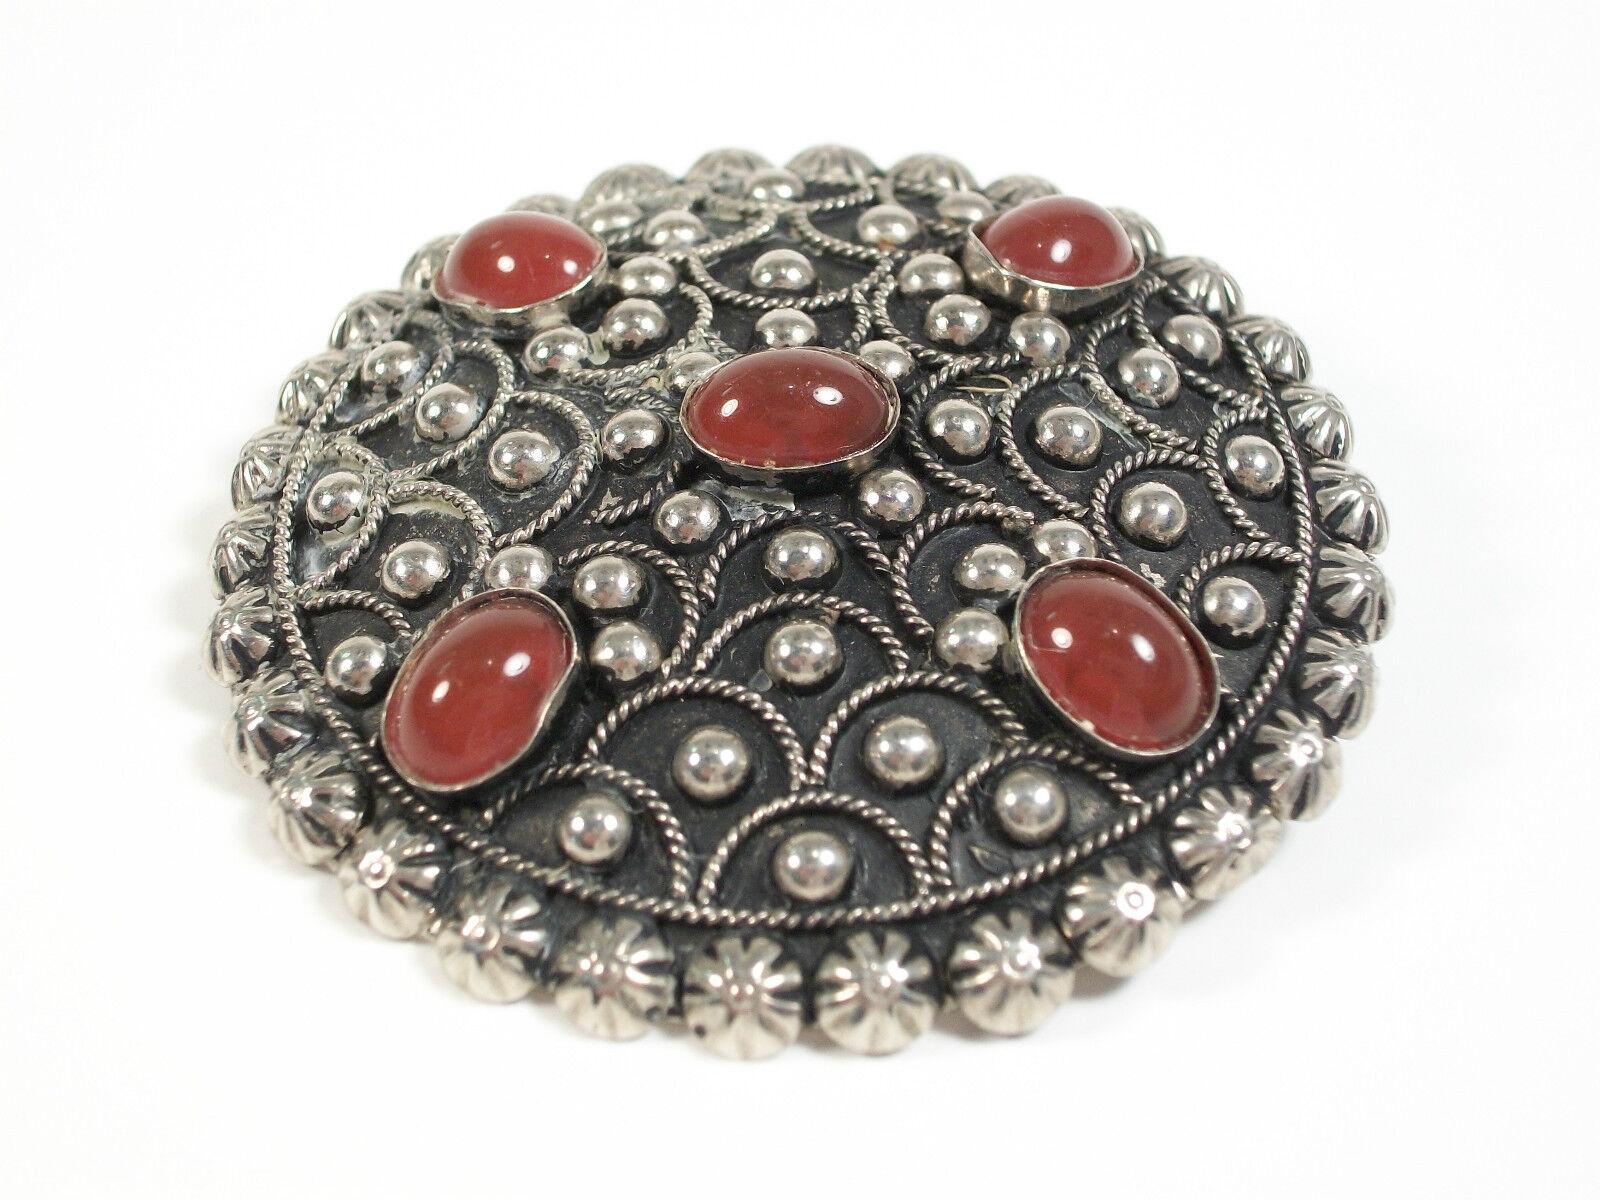 Vintage silver tone brooch or pendant (can be worn either way) - with five bezel set cabochon faux carnelian (glass) stones - Italy - circa 1960's.

Excellent vintage condition - no loss - no damage - no repairs - tarnishing and surface scratches